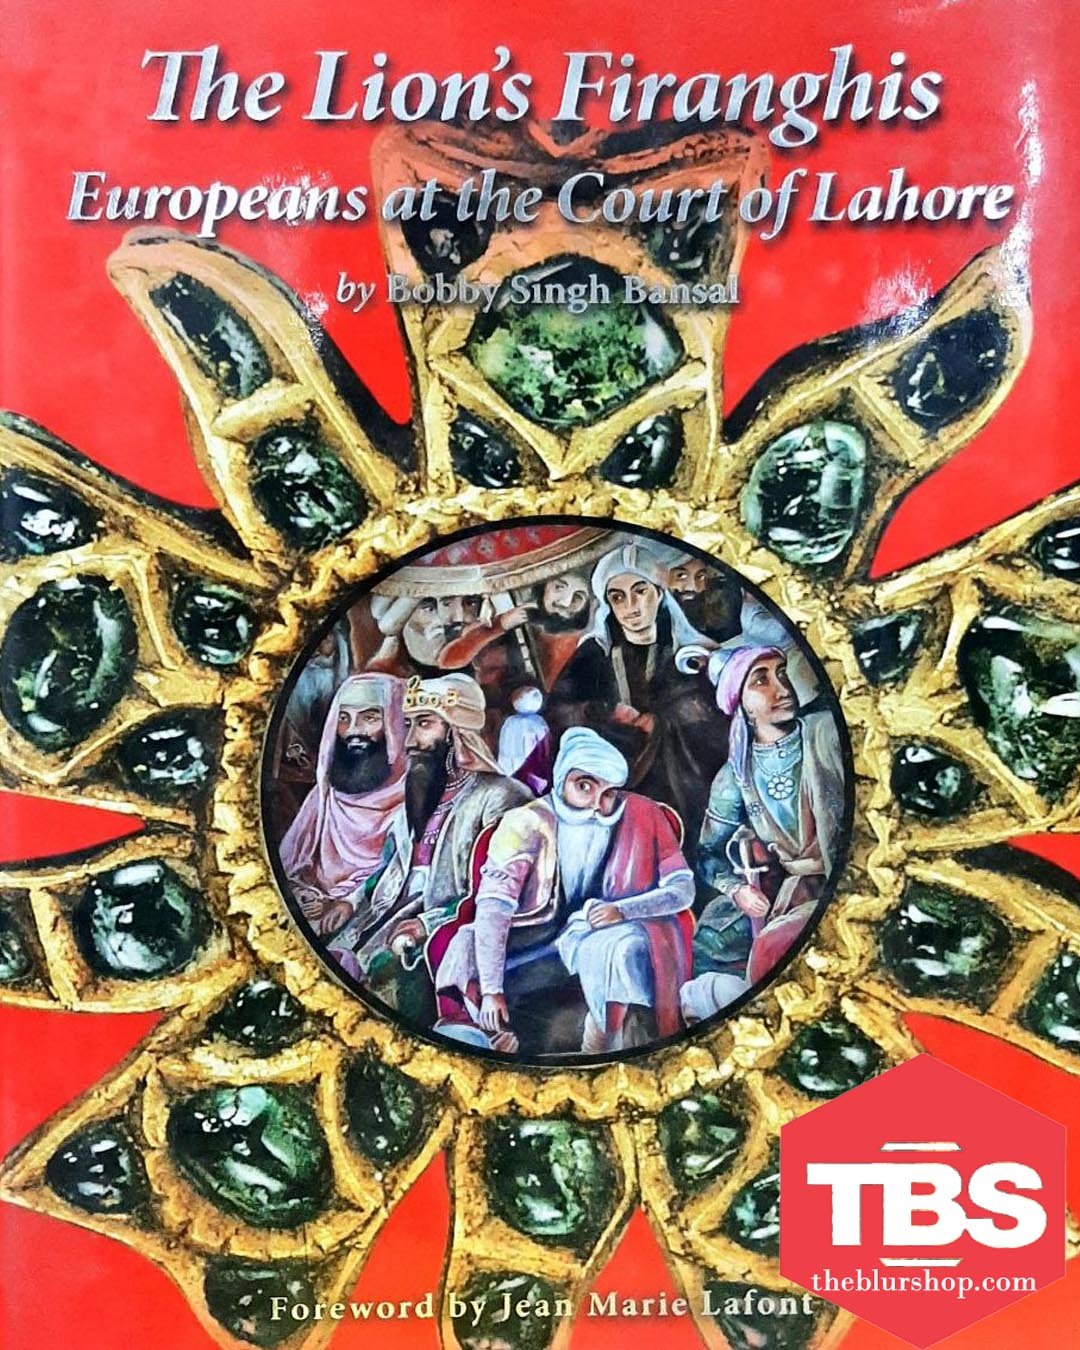 The Lion’s Firanghis: Europeans at the Court of Lahore